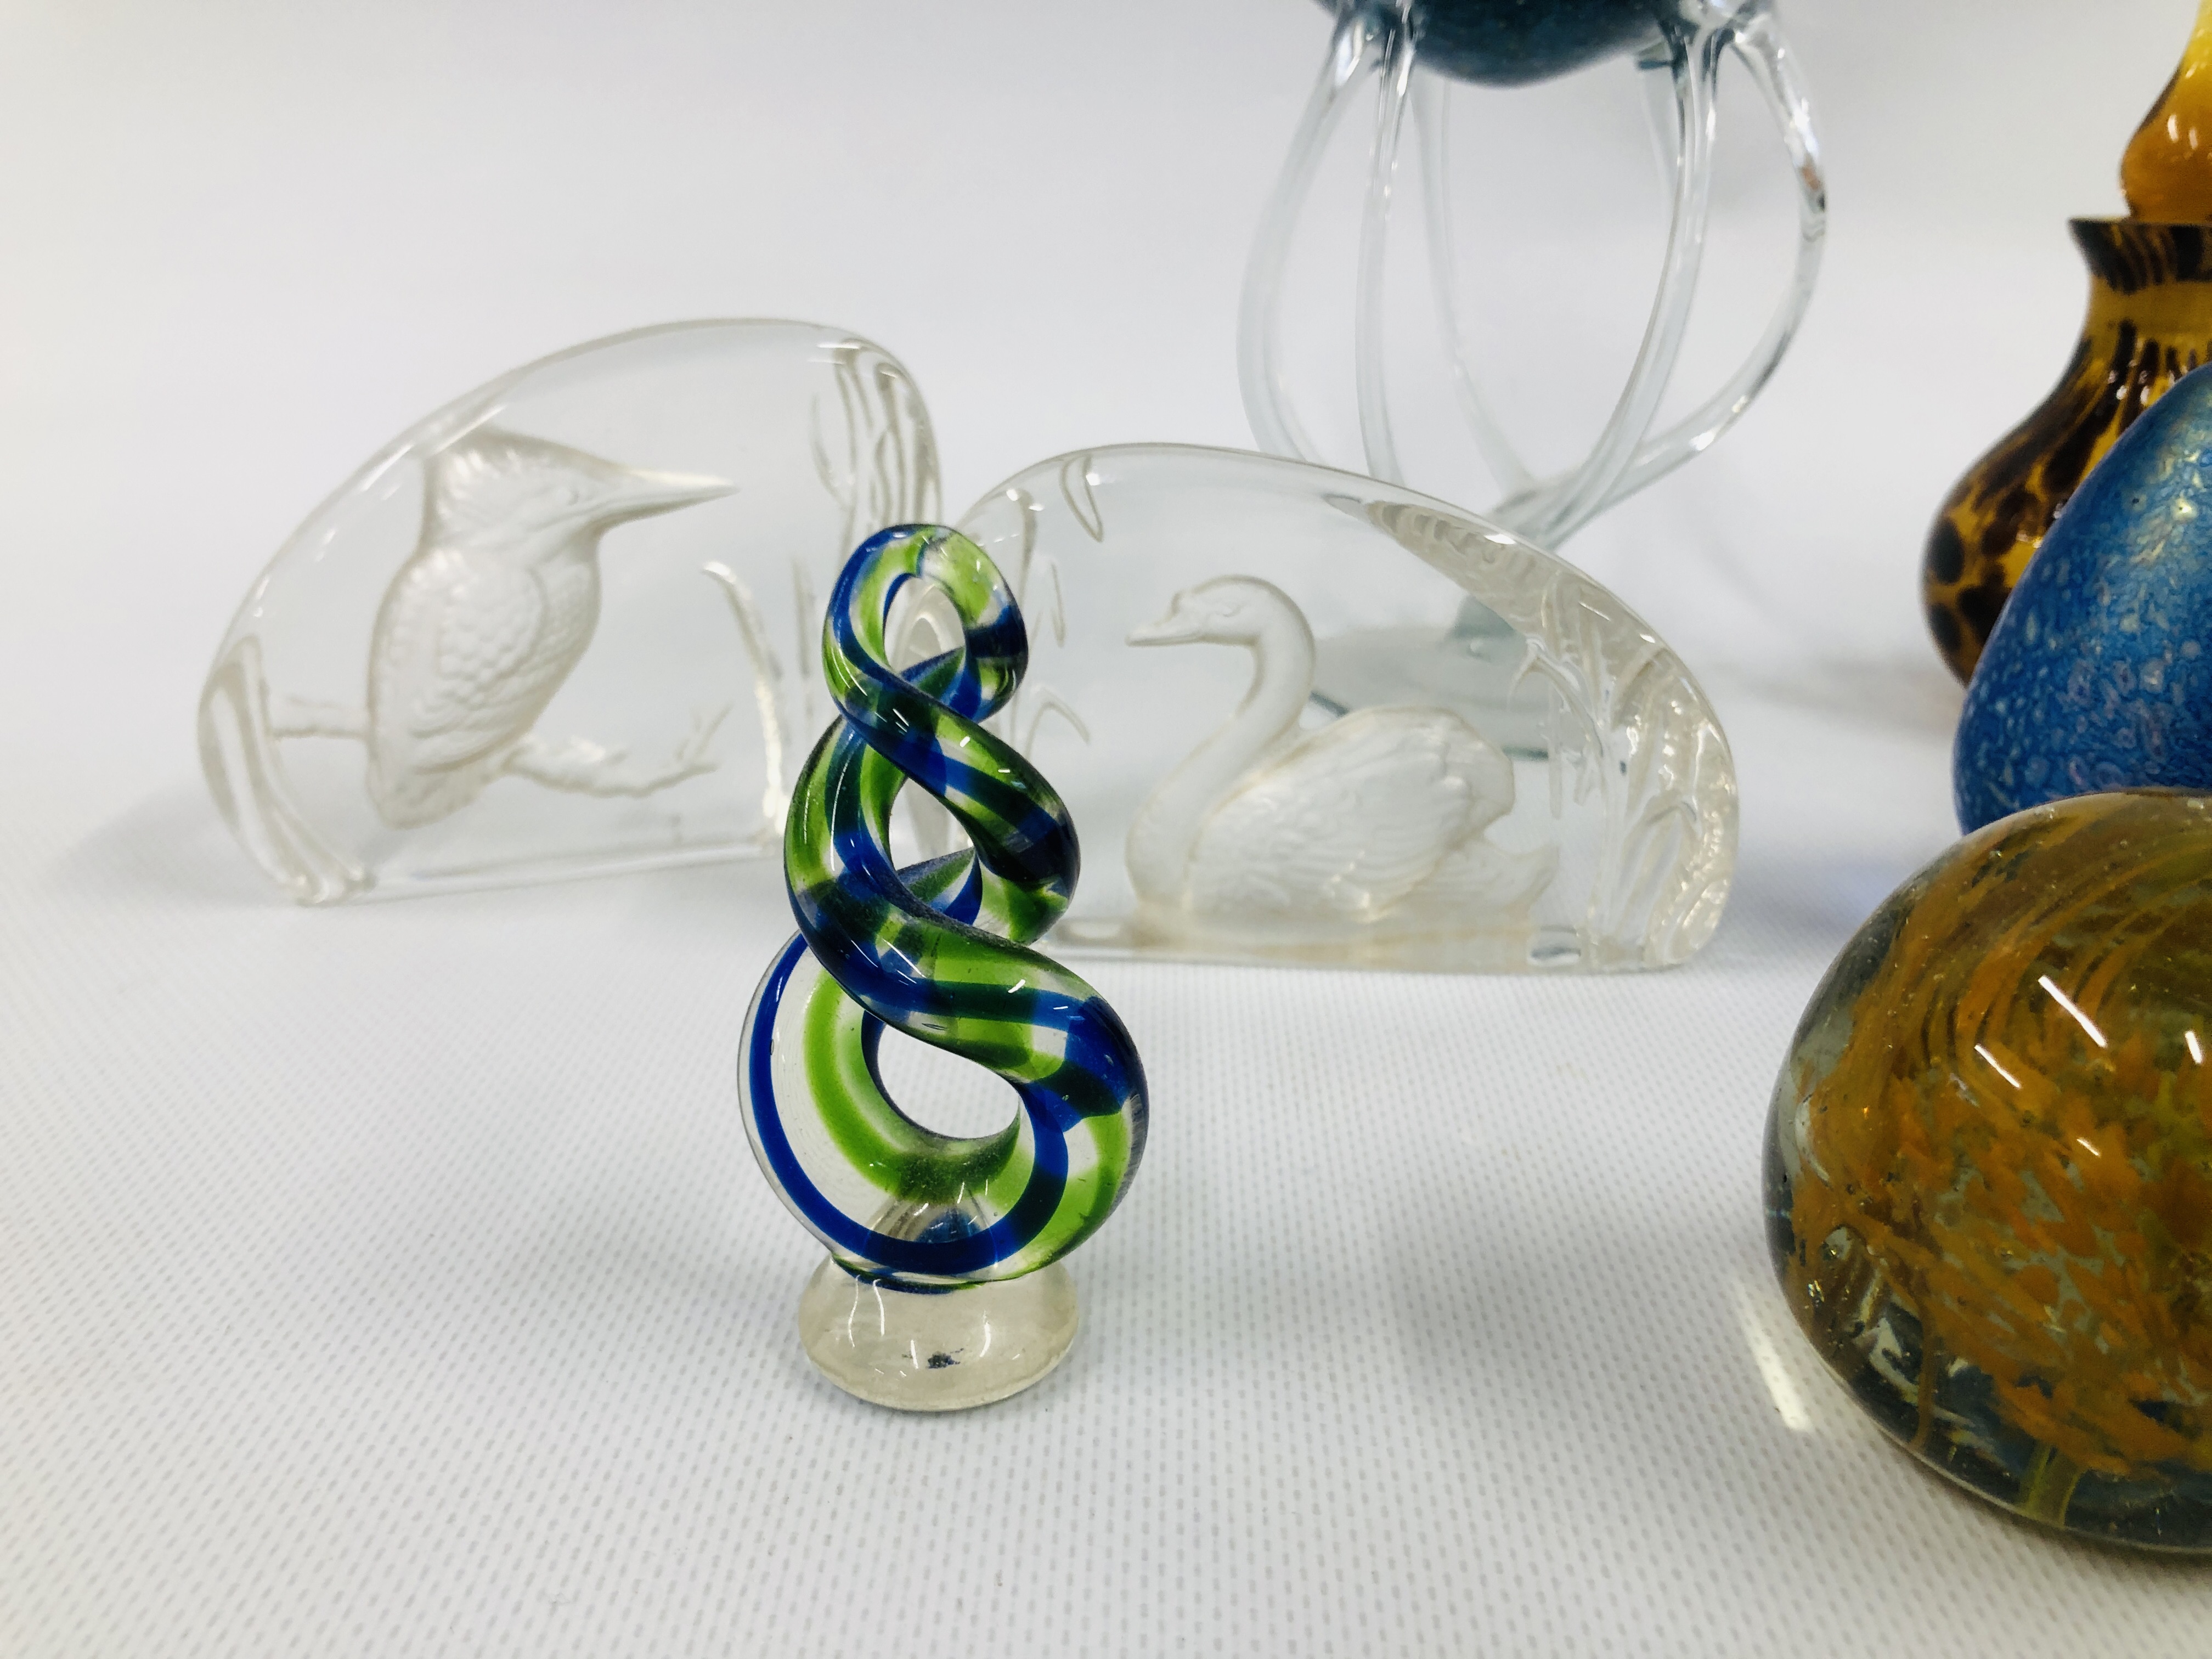 A COLLECTION OF ASSORTED ART GLASS PAPERWEIGHTS, VASES, ETC. - Image 4 of 7